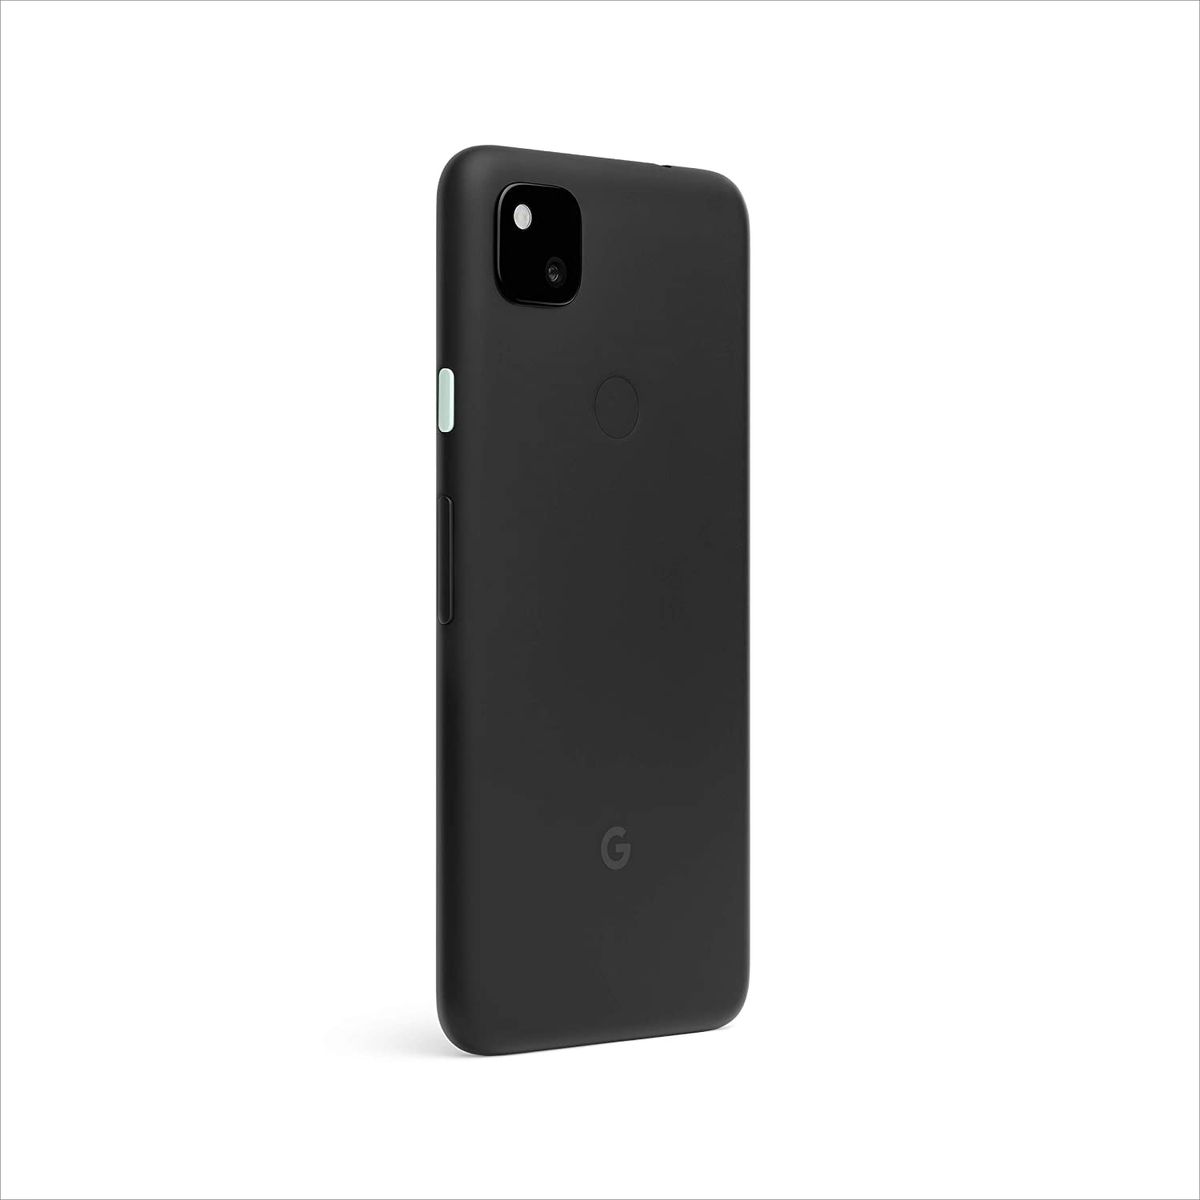 Exploring The Squeeze Feature On Google Pixel 4